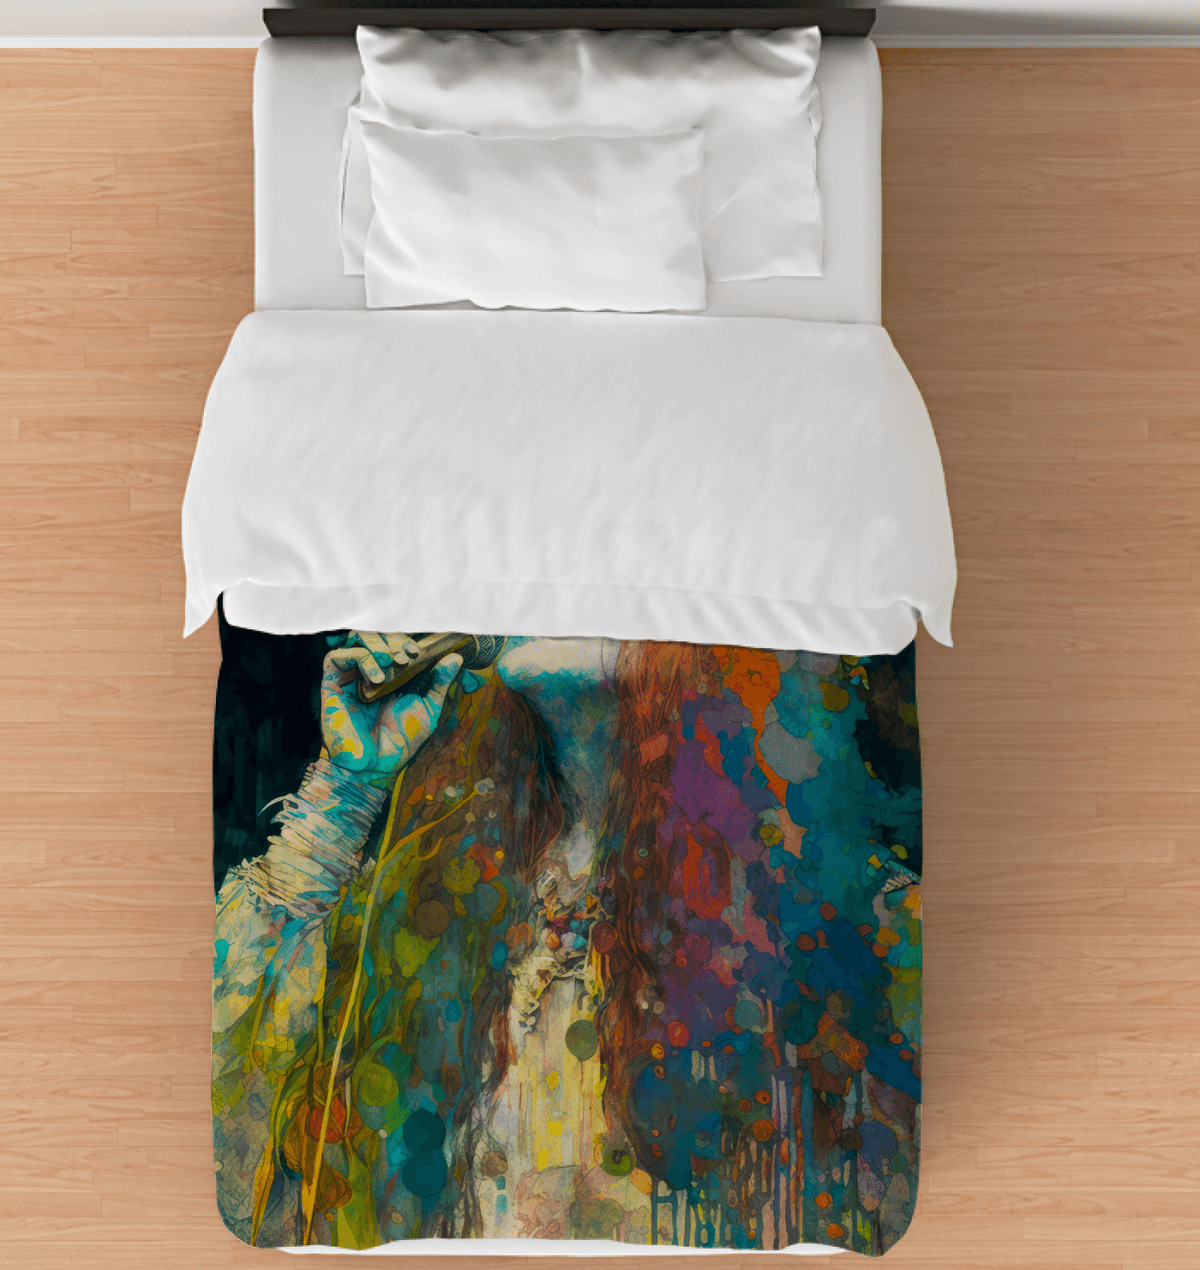 Sophisticated NS 984 Duvet Cover for a luxurious bedroom update